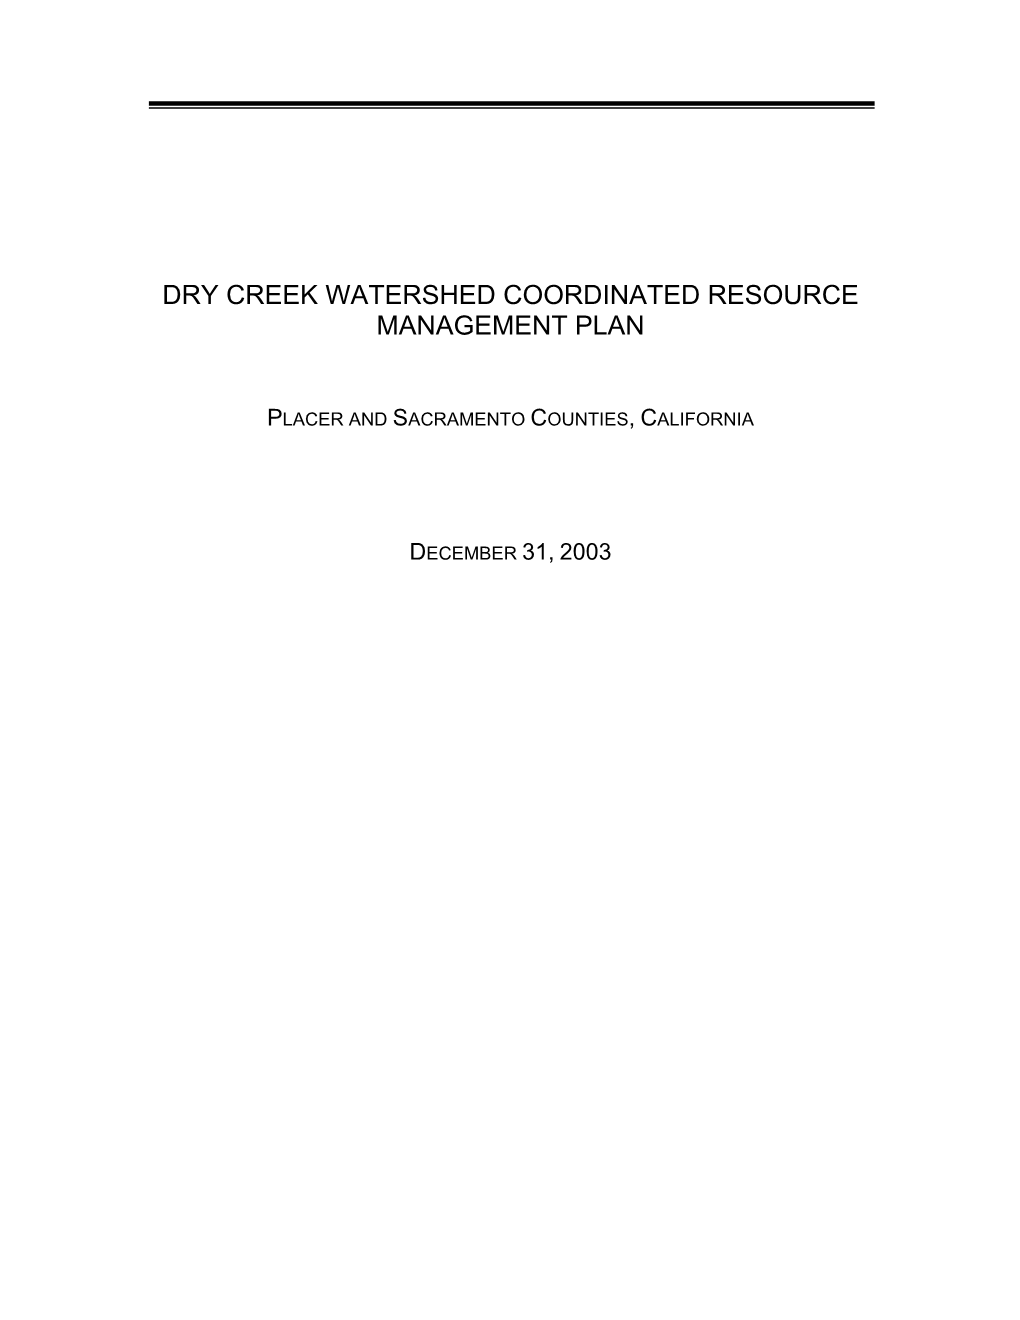 Dry Creek Watershed Coordinated Resource Management Plan